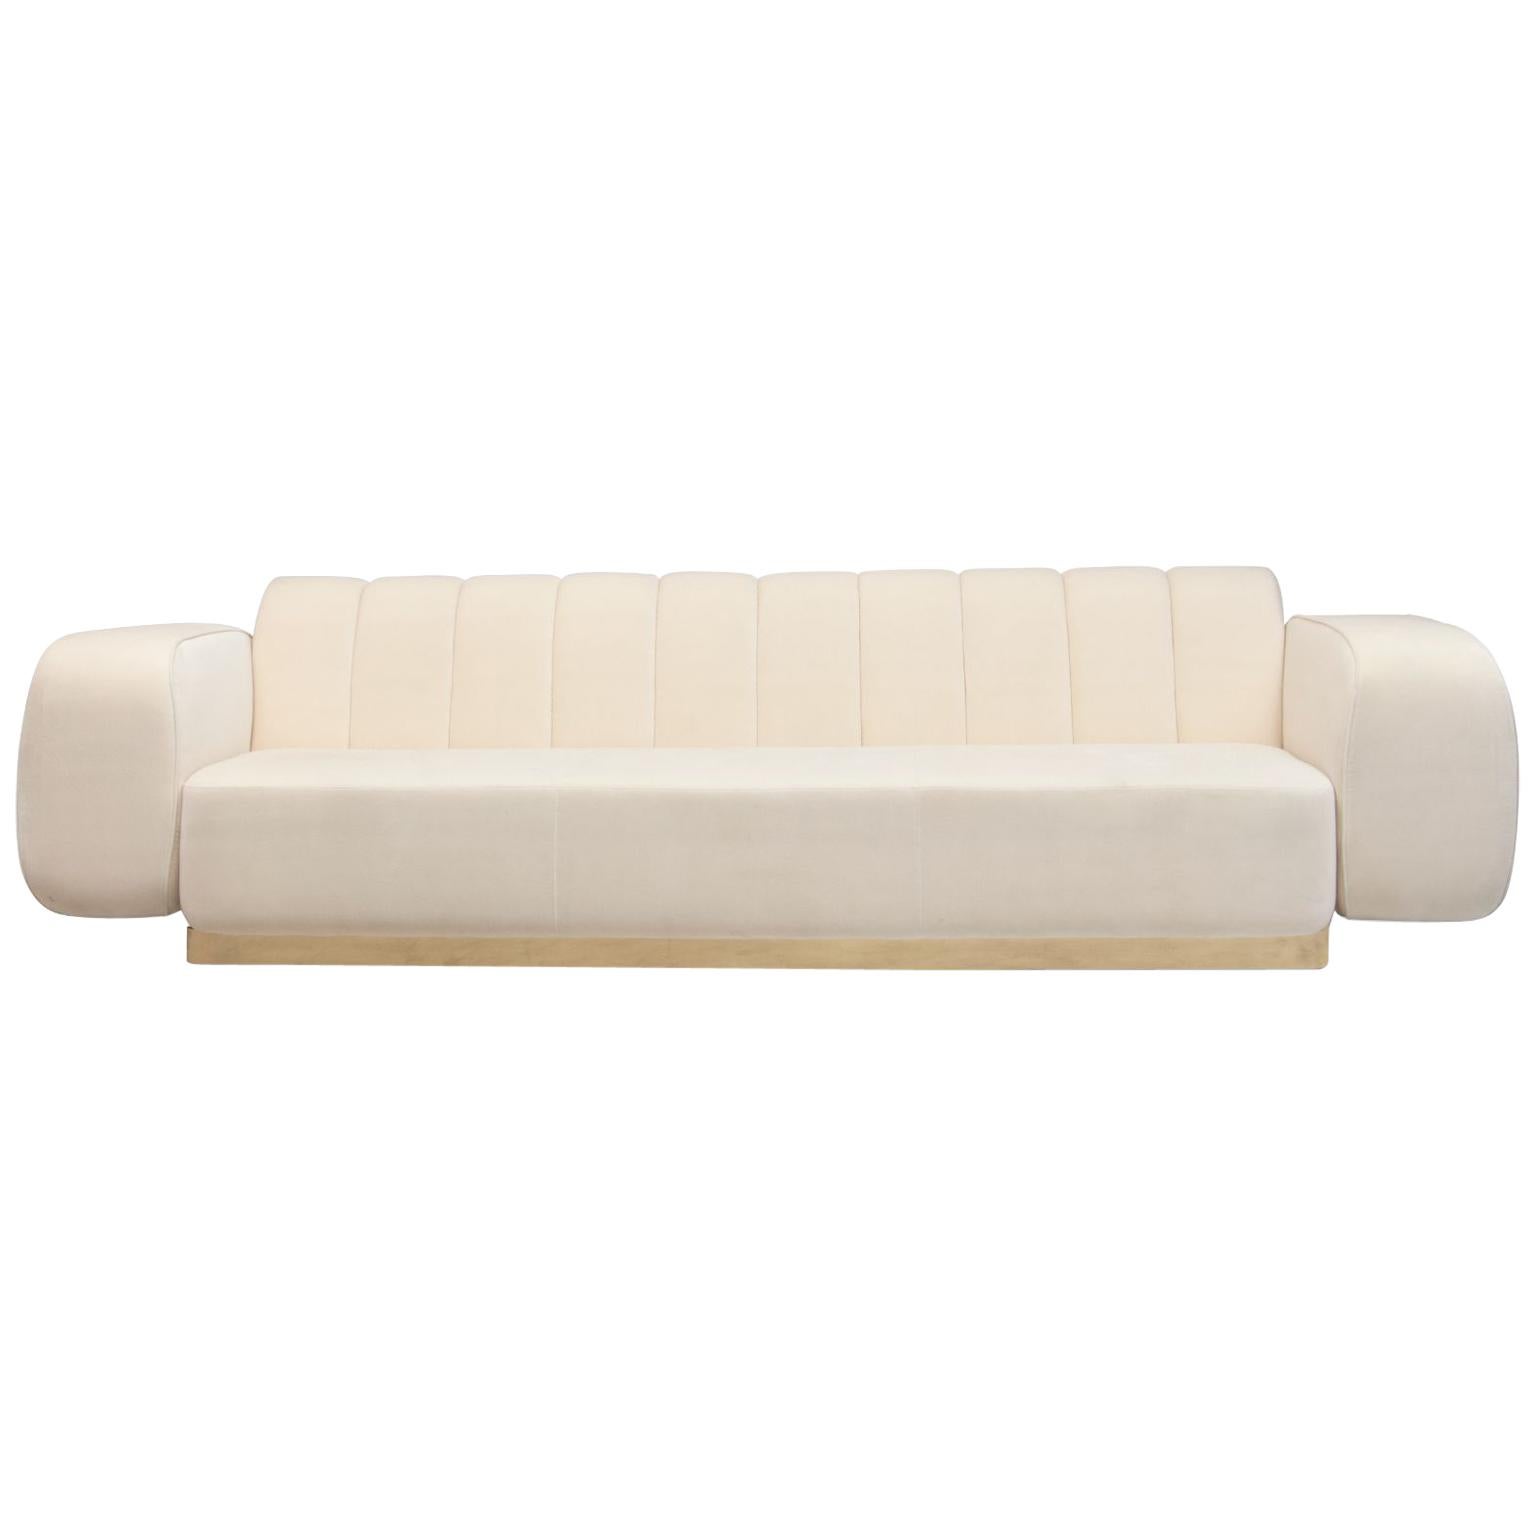 Novak is a sofa that combines some details from midcentury style with a contemporary design vision. The base is rectangular, but it has a contrasting low back with rounded shapes, upholstered with sophisticated leather, and finished with piping